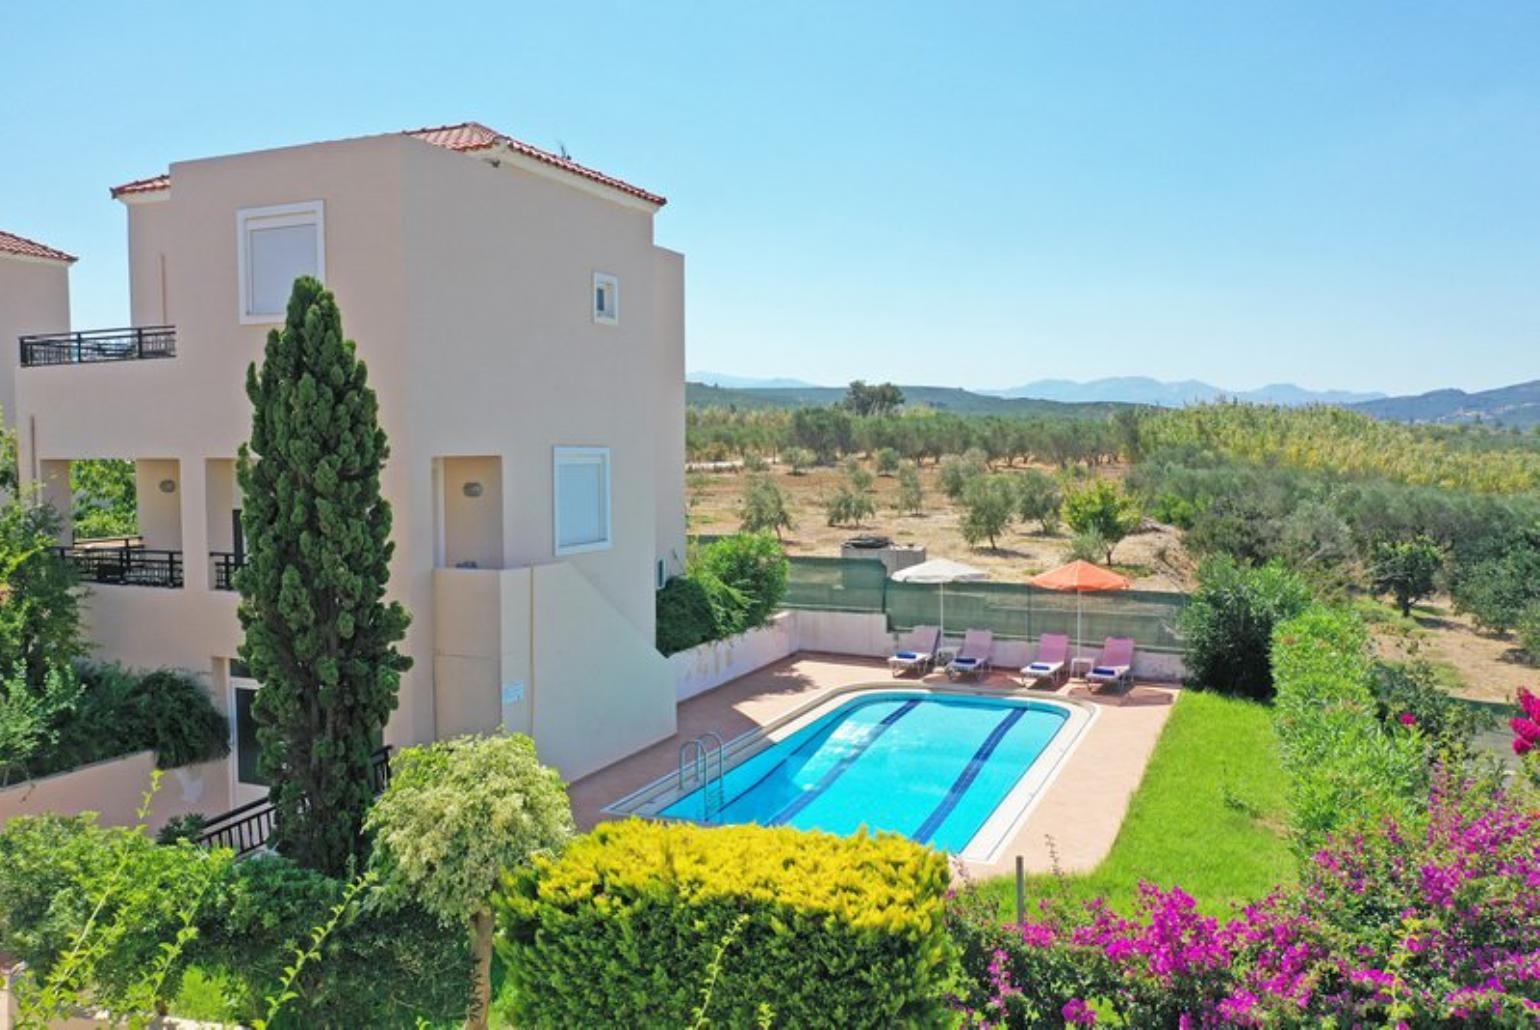 ,Beautiful villa with private pool, terrace, and lawn